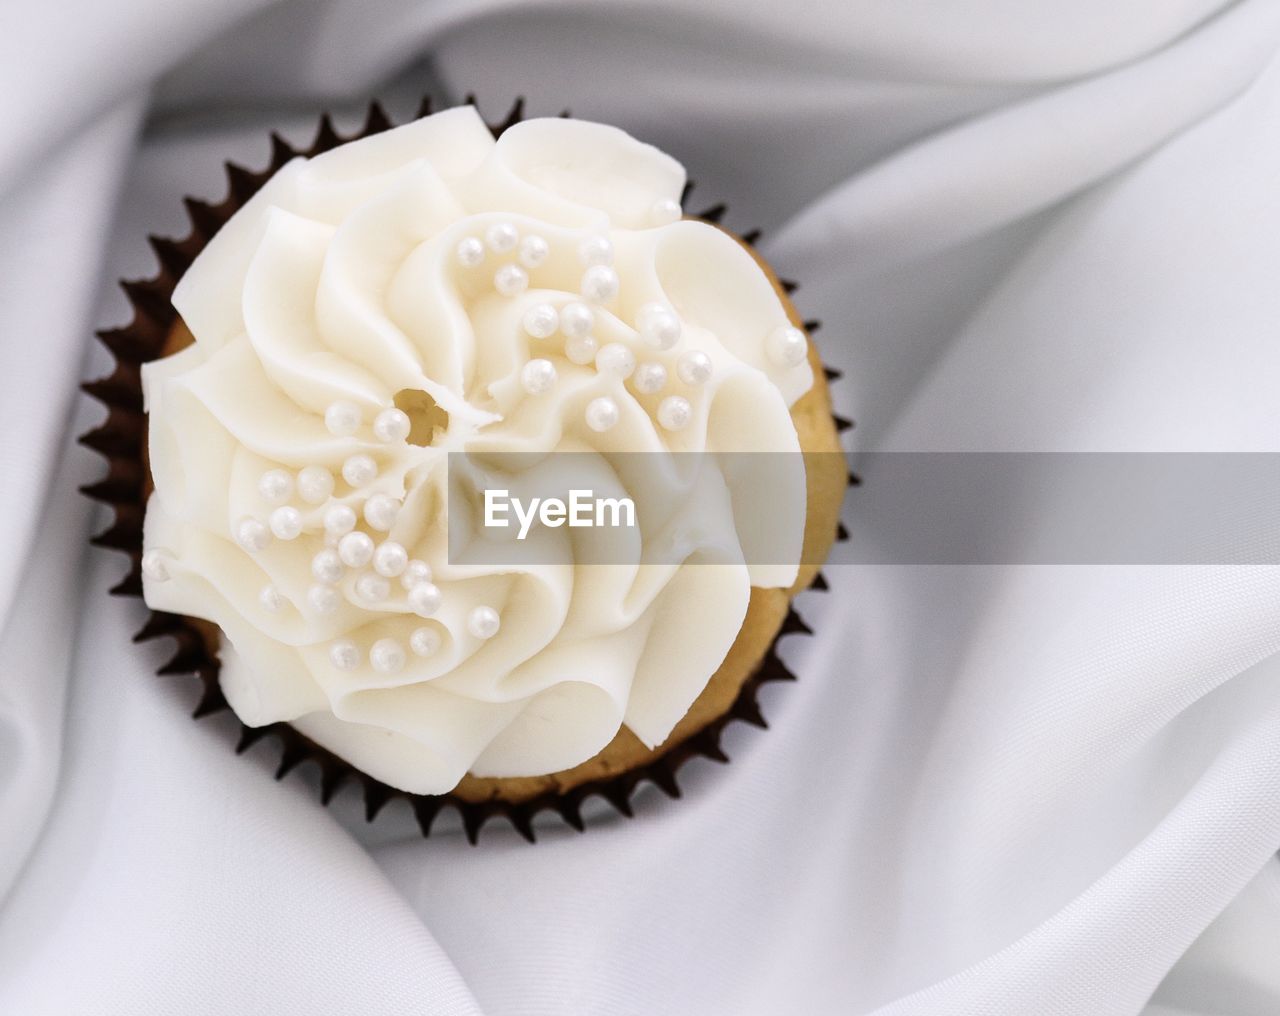 CLOSE-UP OF CUPCAKES ON WHITE